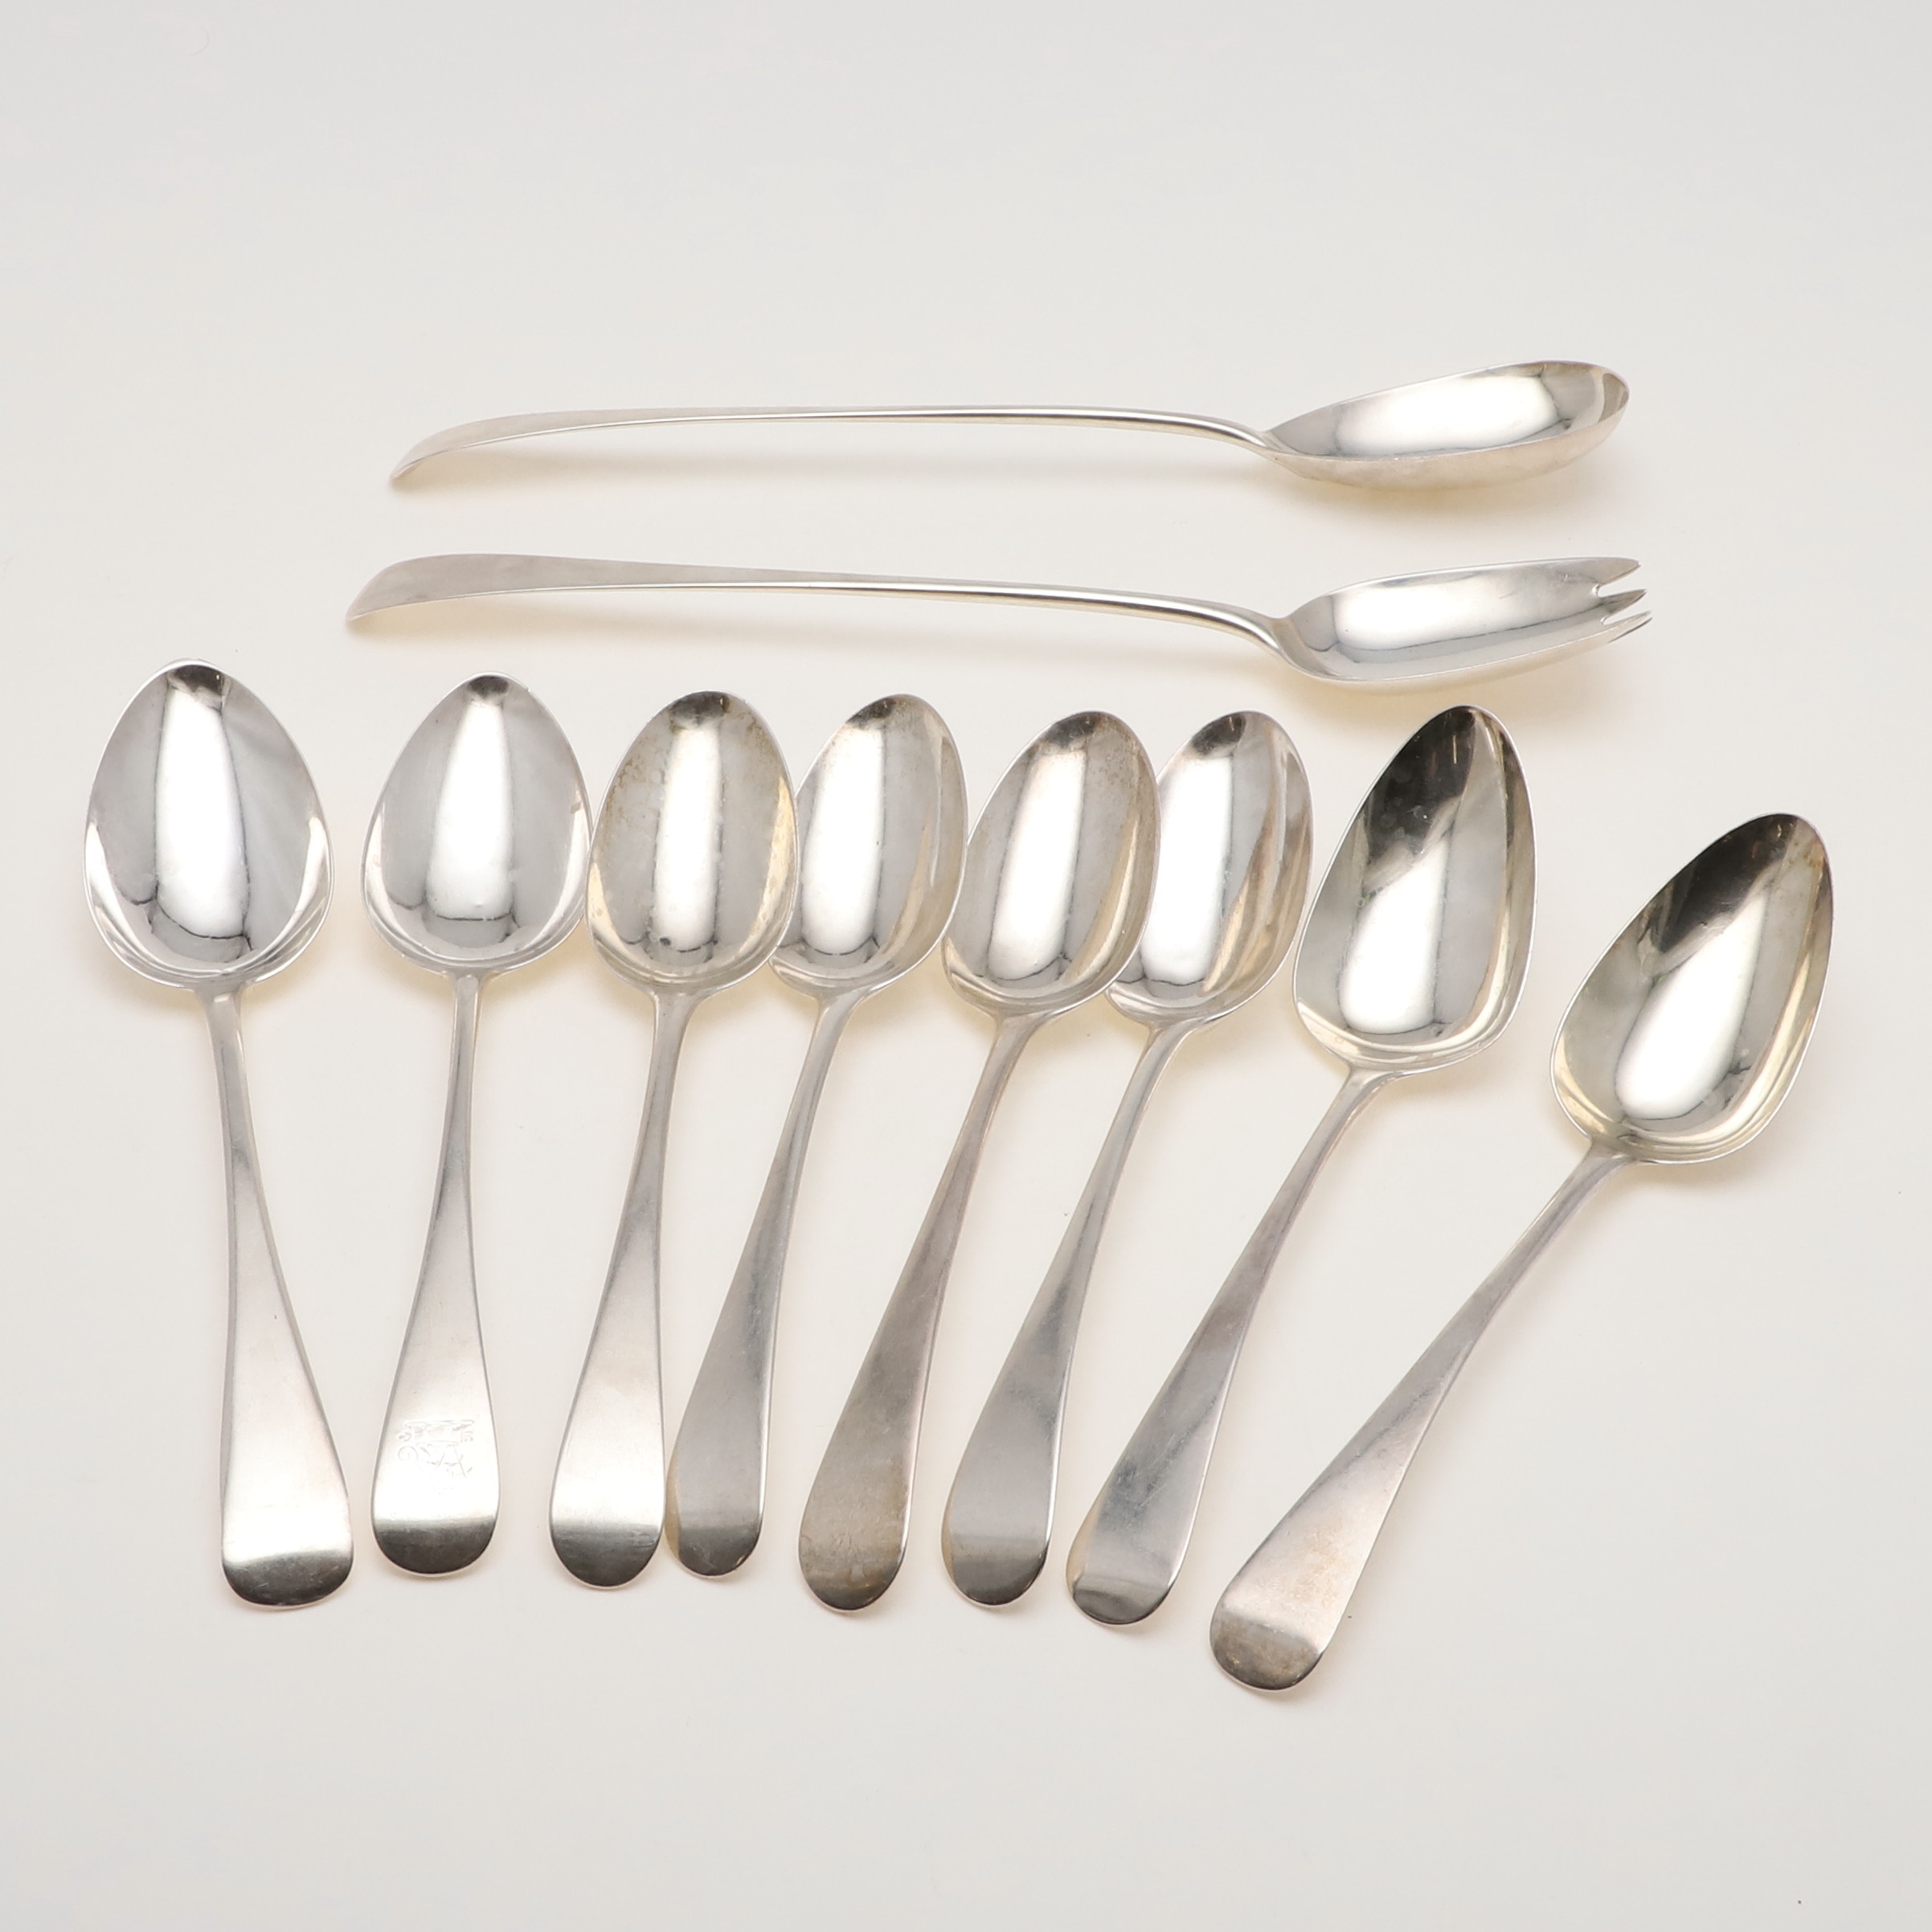 MISCELLANEOUS OLD ENGLISH PATTERN FLATWARE.